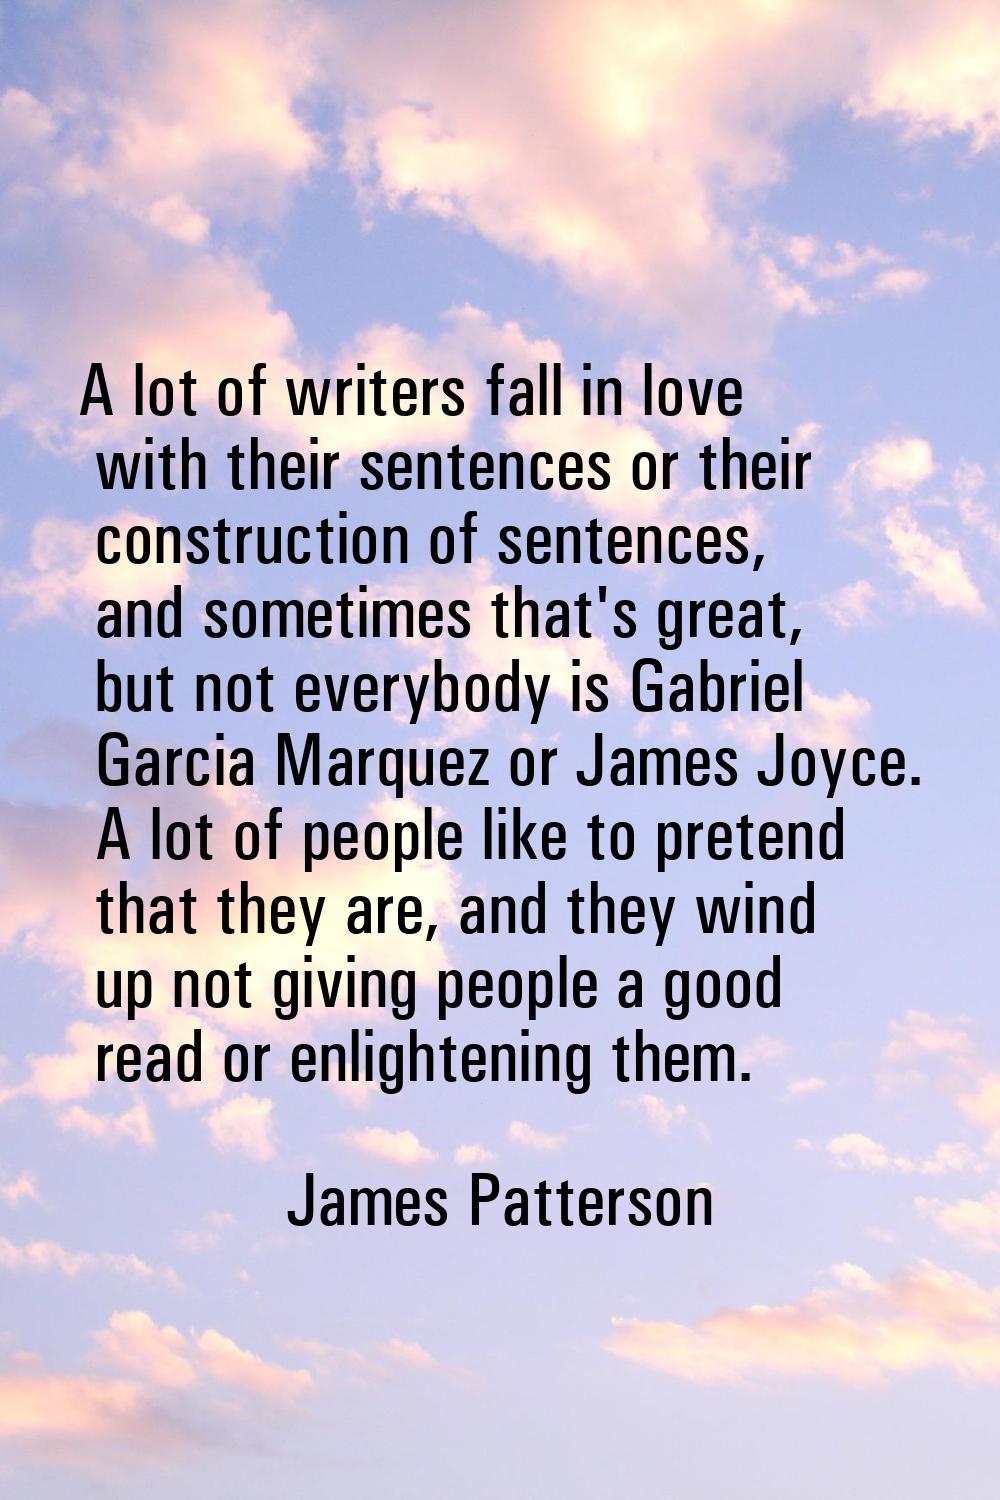 A lot of writers fall in love with their sentences or their construction of sentences, and sometime